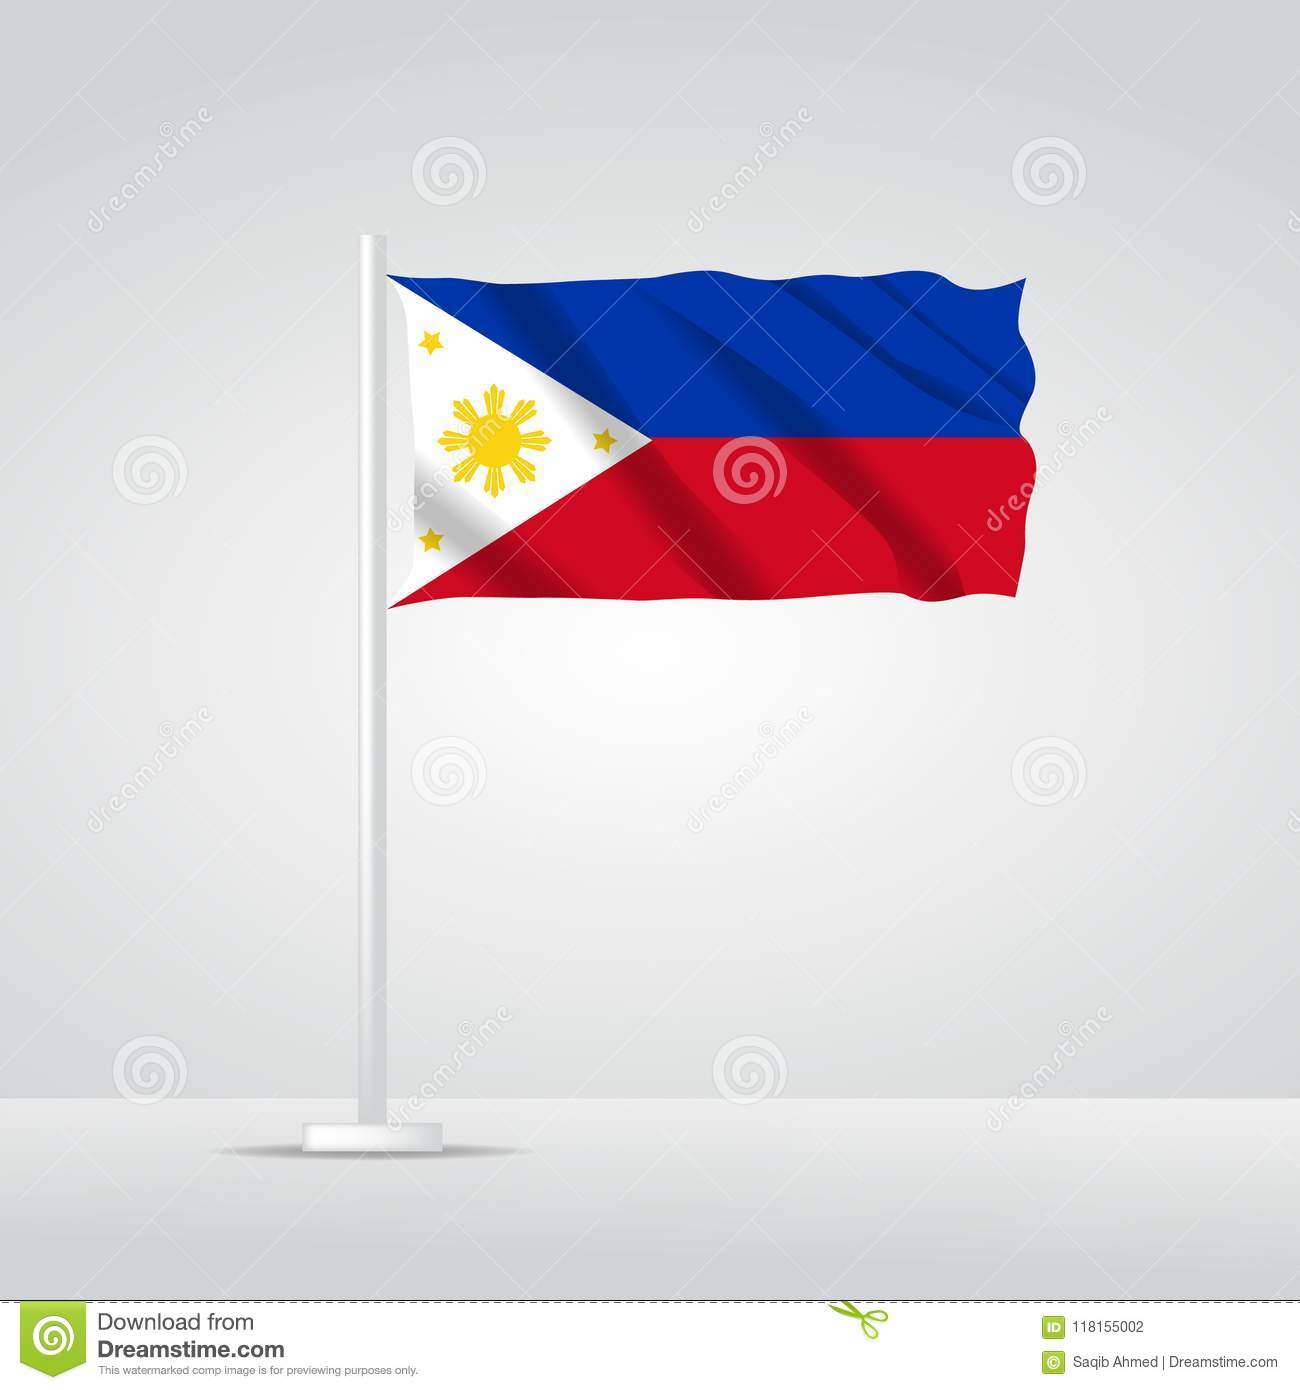 School with philippine flag clipart